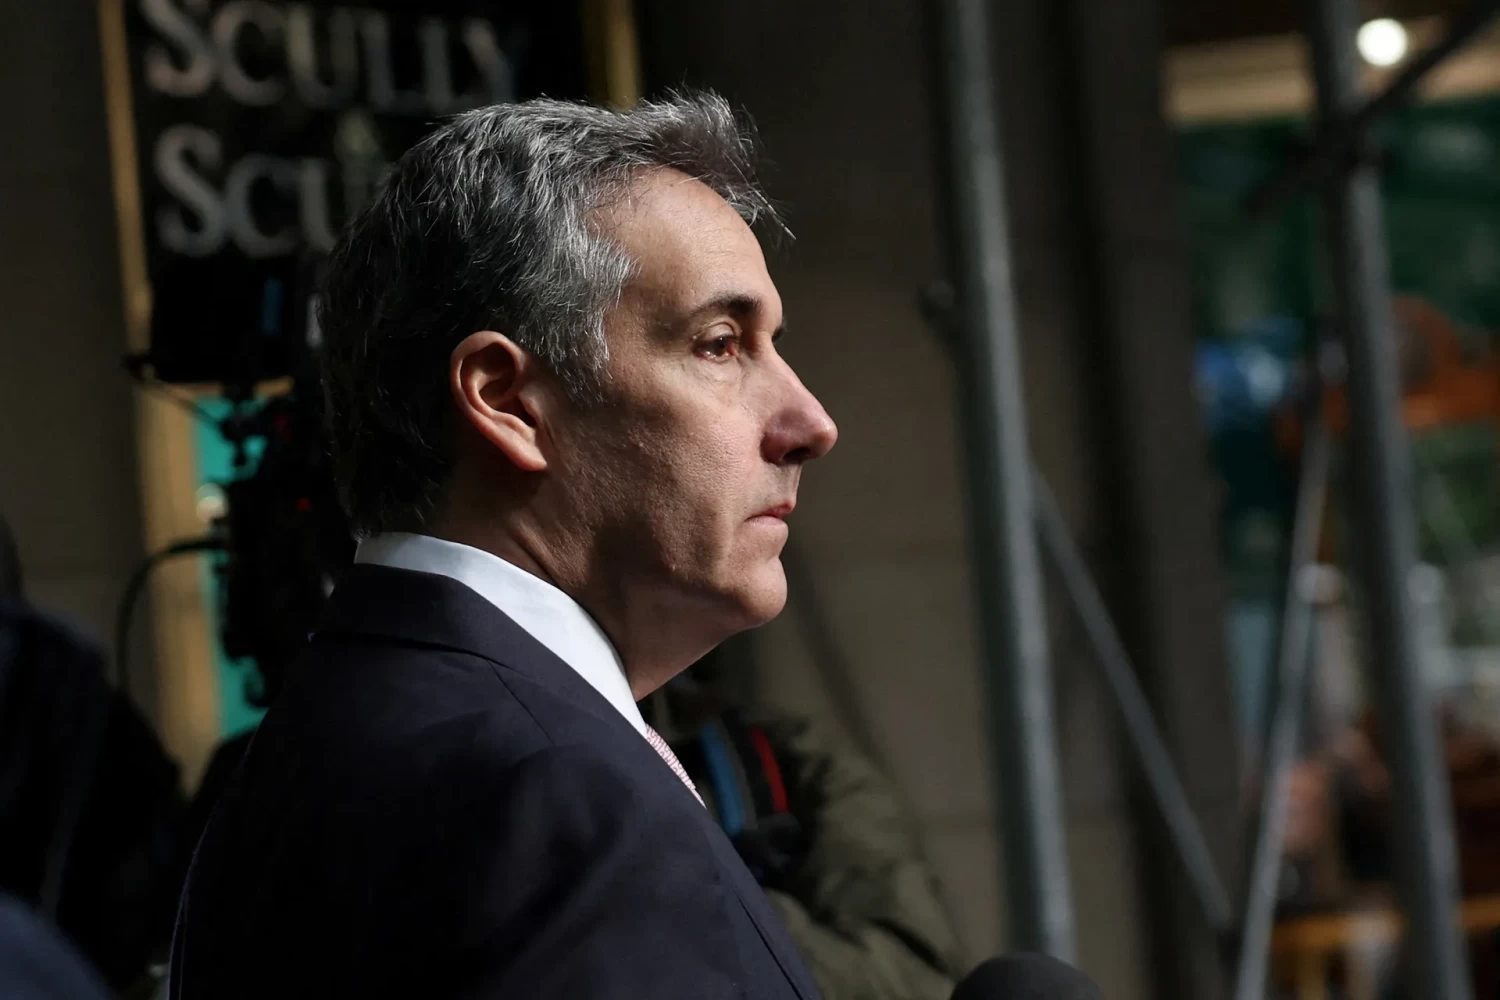 Can You Believe What Michael Cohen Just Said at the Trump Trial?